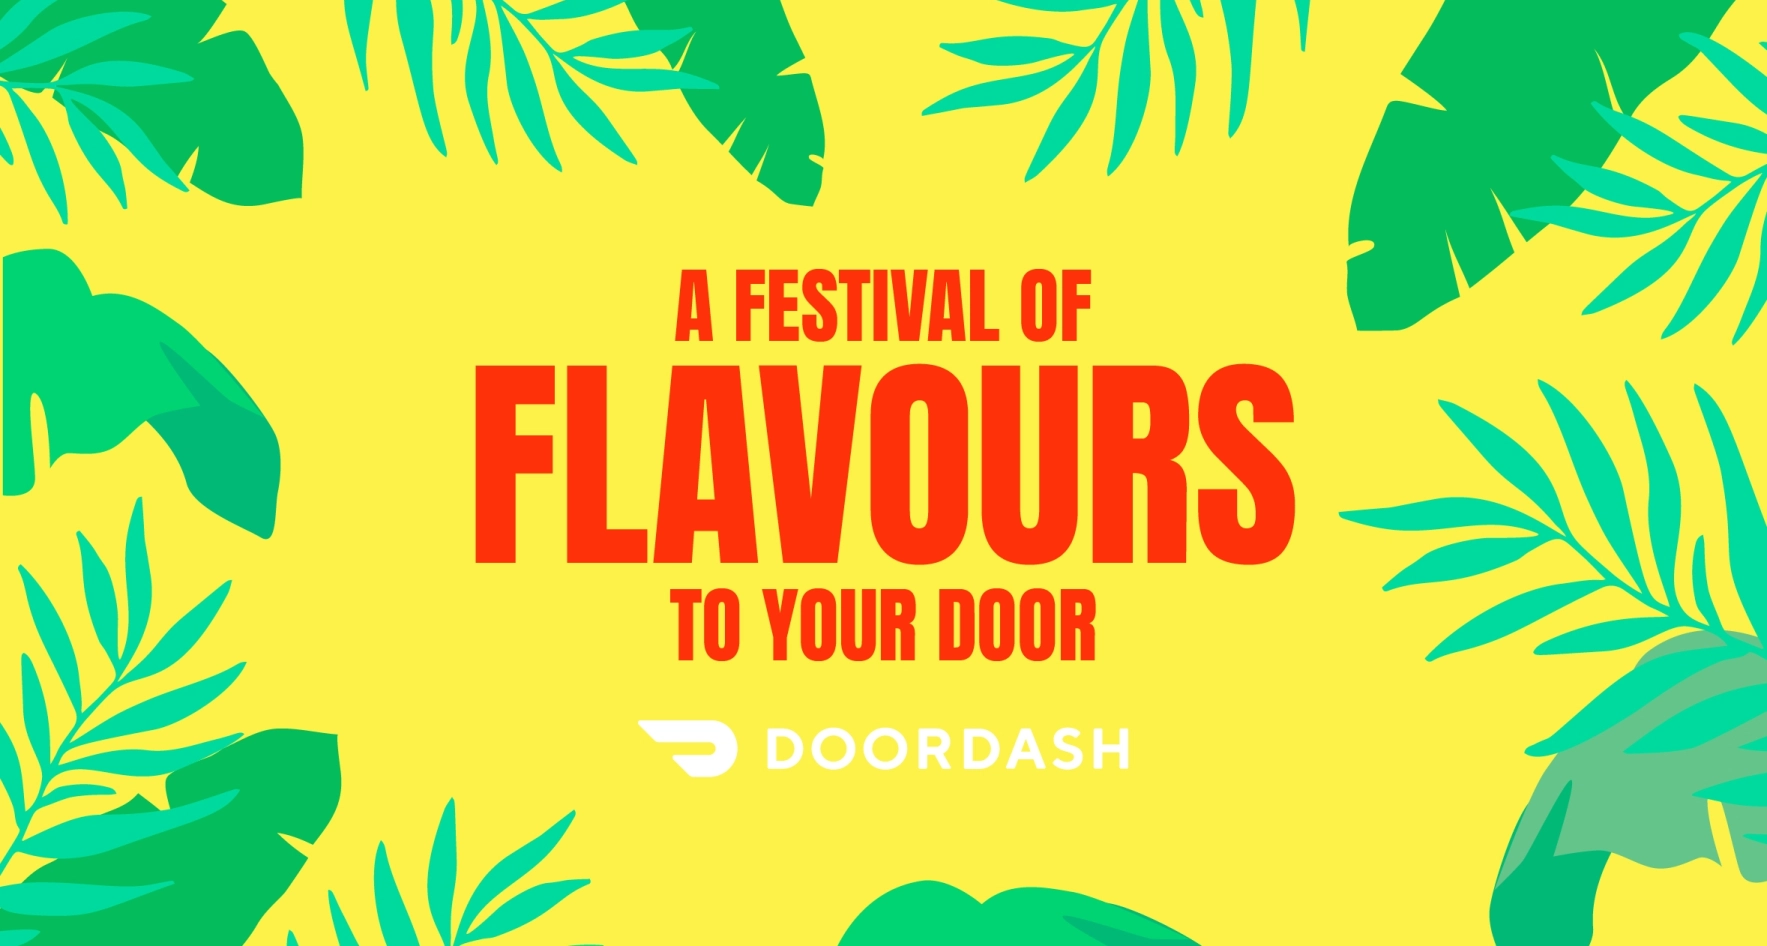 A FESTIVAL OF FLAVOURS